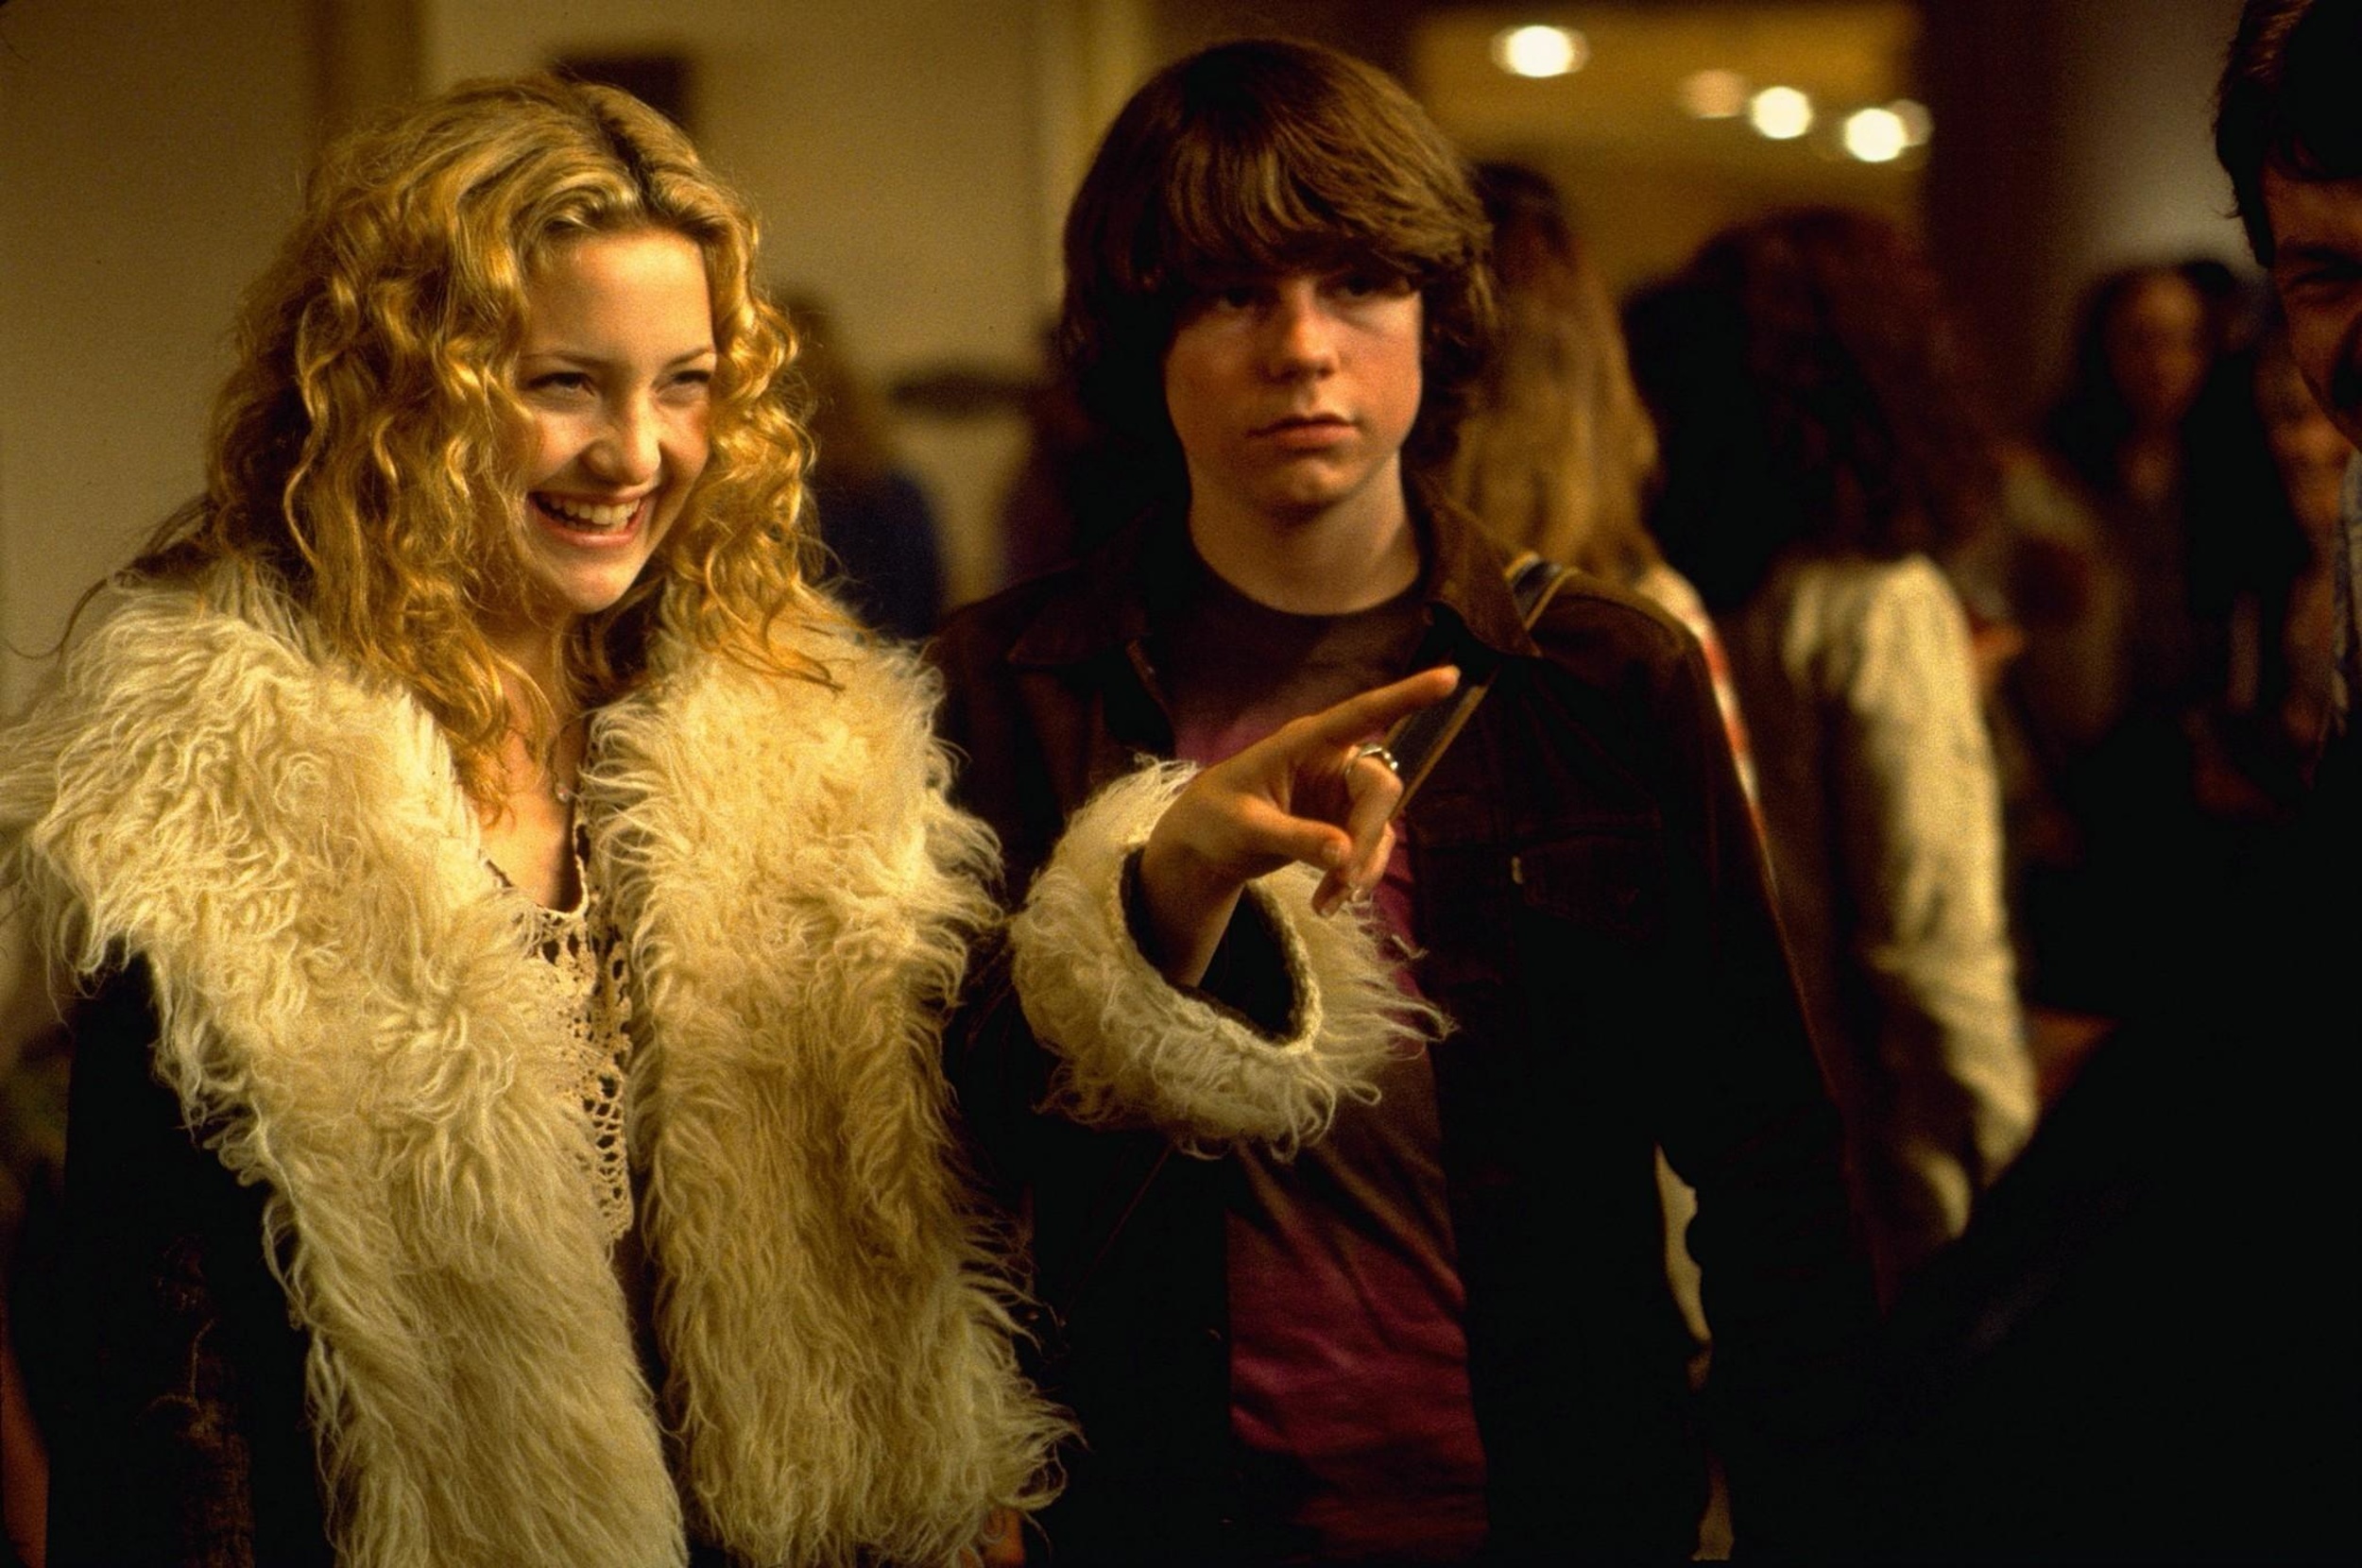 <p>Cameron Crowe's <a href="https://www.youtube.com/watch?v=6iyp0qcf7-w">semi-autobiographical tale</a> about a teenager (Patrick Fugit) writing for <em>Rolling Stone</em> while on tour with popular rock band Stillwater. Young William learns plenty about life and the world of rock and roll. On the flip side, those around him, specifically band groupie Penny Lane (Kate Hudson) and rocker Russell Hammond (Billy Crudup), gain a little something from the lad. </p><p>You may also like: <a href='https://www.yardbarker.com/entertainment/articles/the_definitive_kiss_playlist/s1__35365424'>The definitive Kiss playlist</a></p>